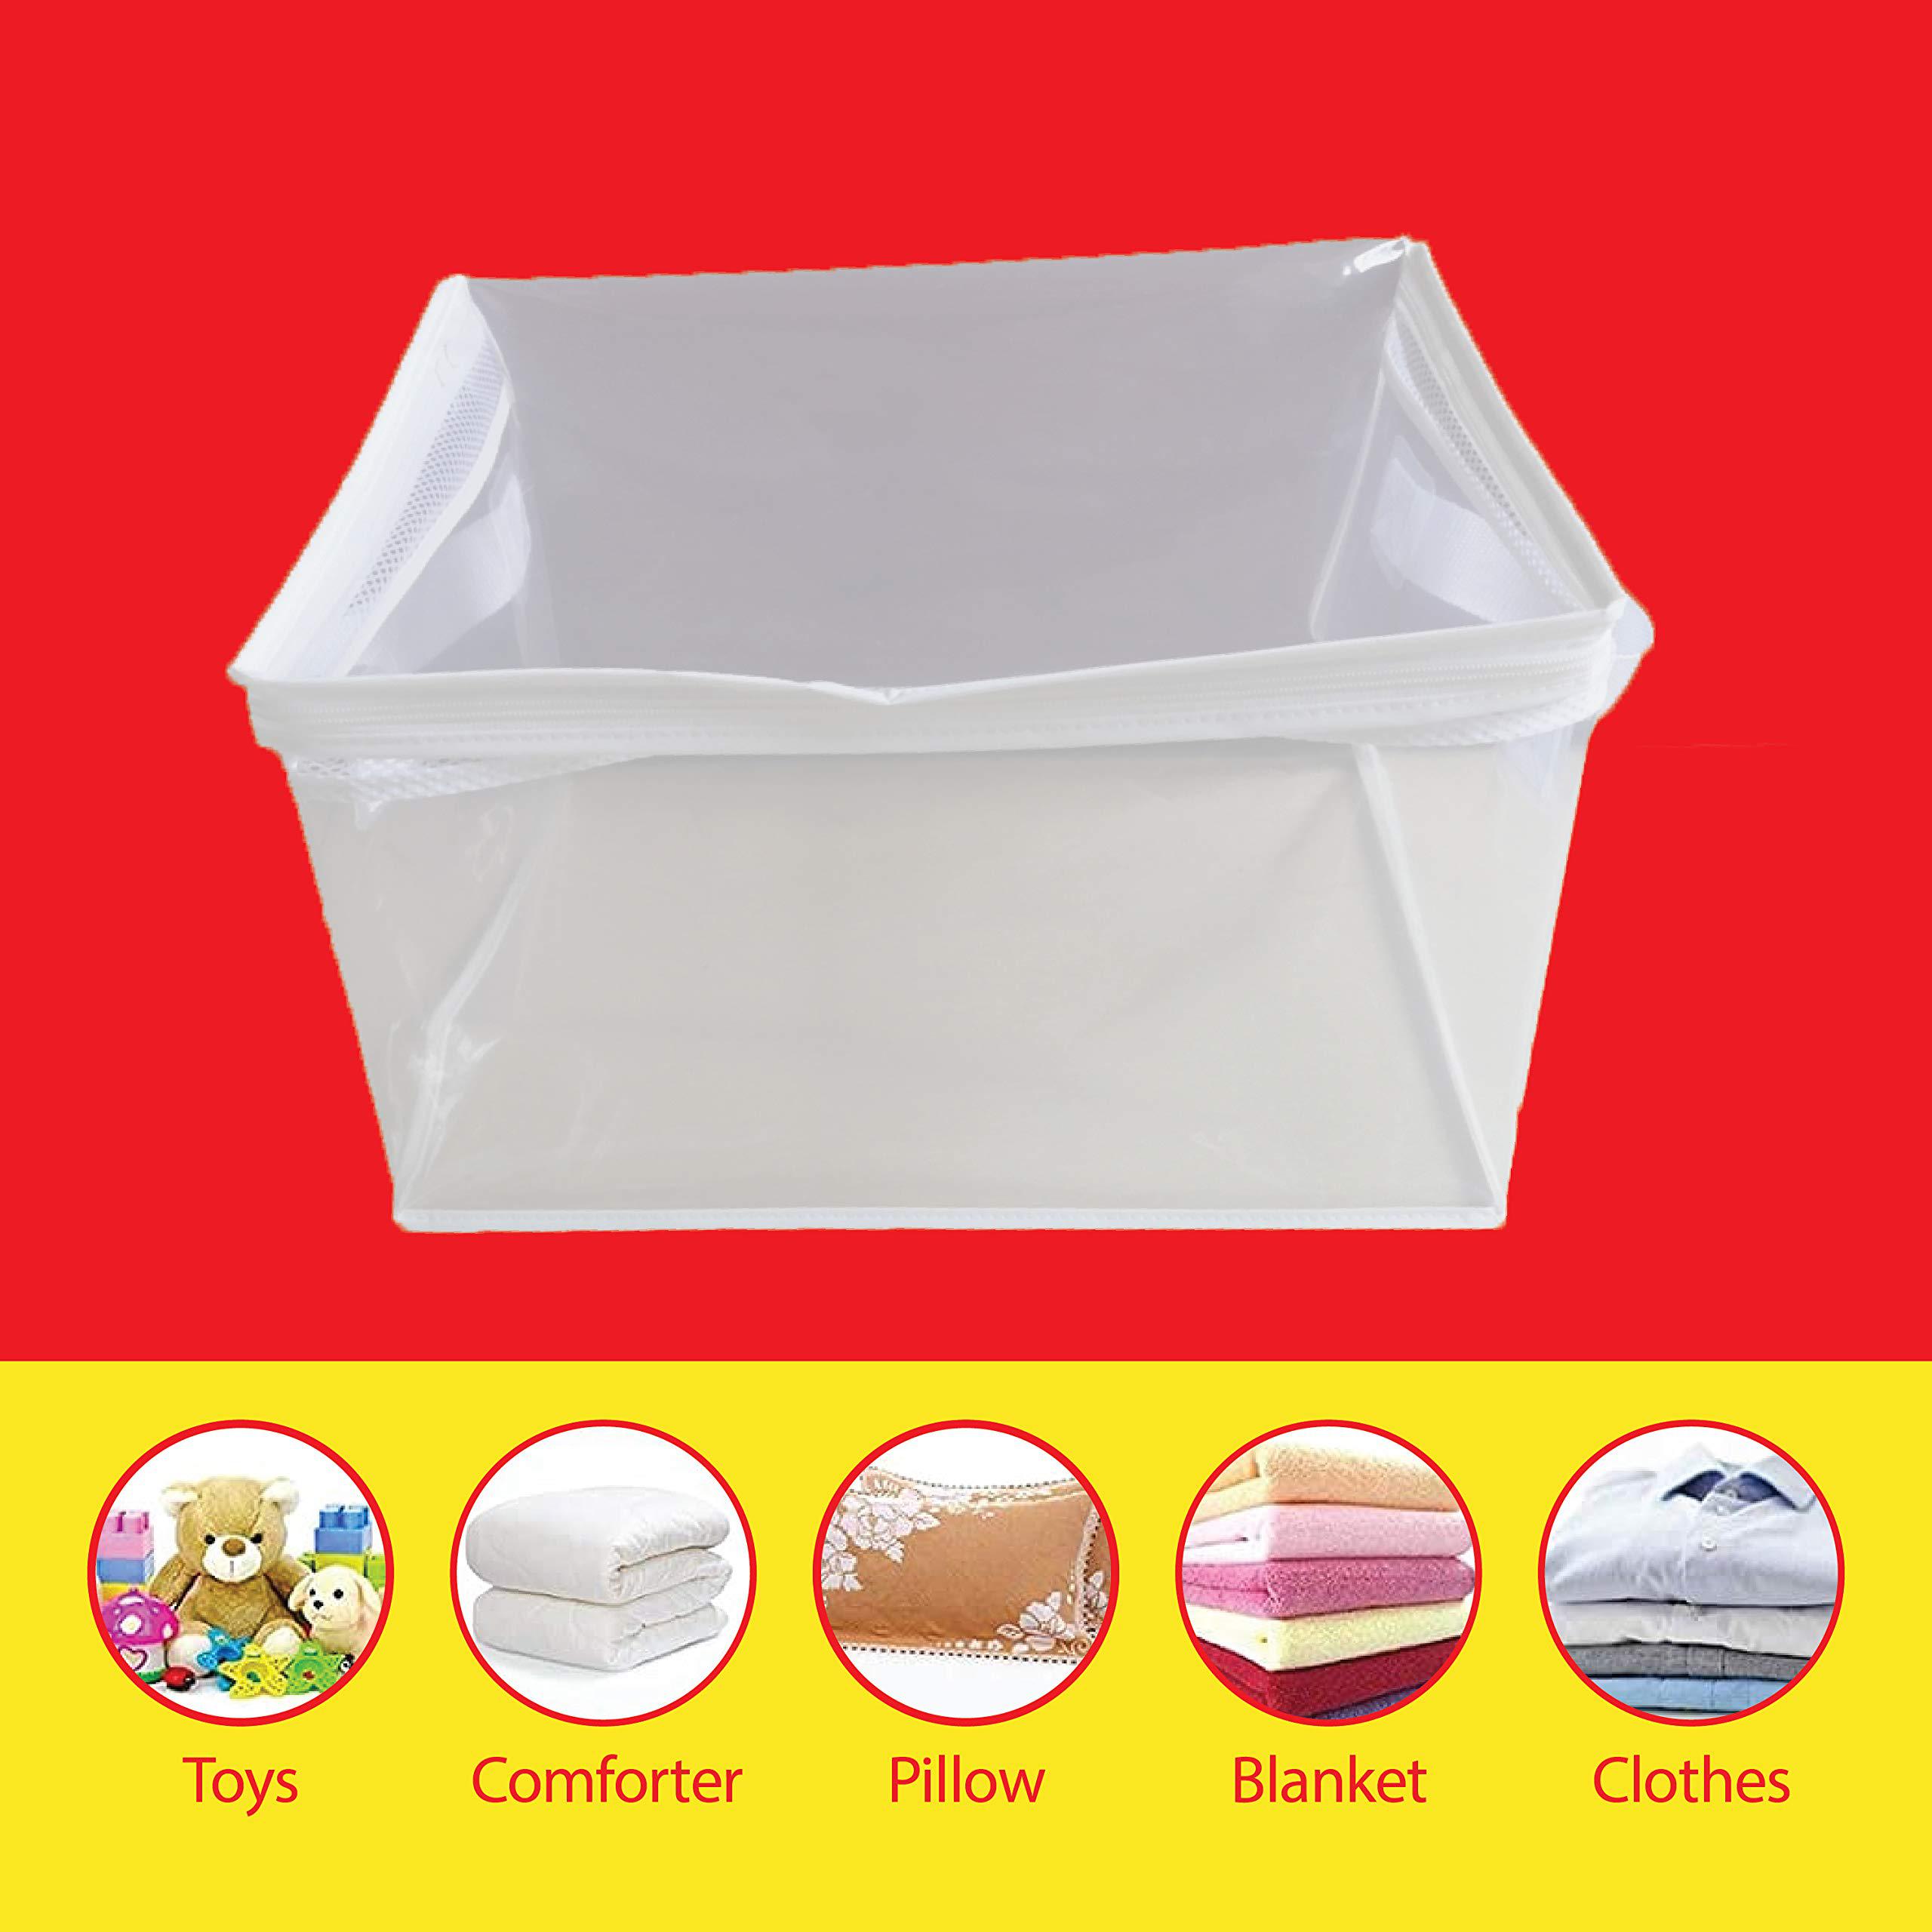 Shiny Select extra large big 10 gallon size clear plastic totes